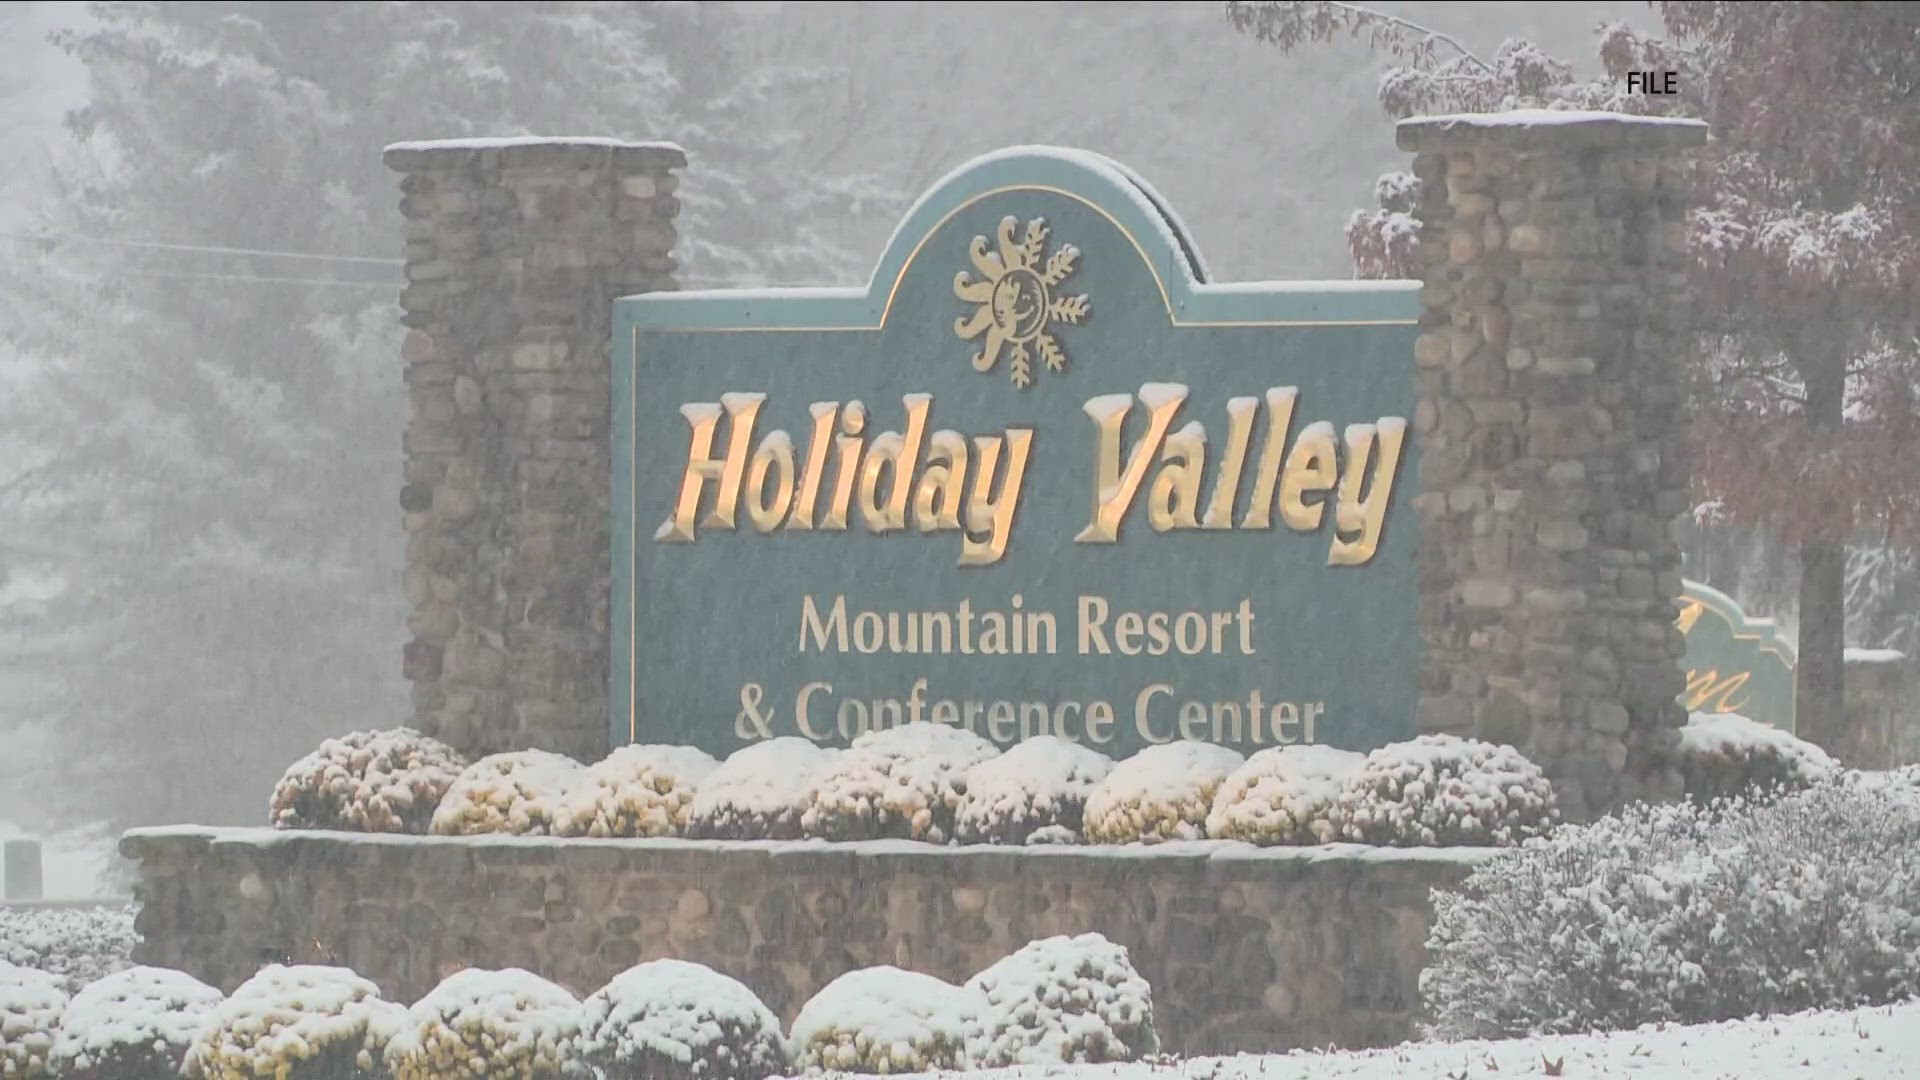 With its ski season winding down, the owners of Holiday Valley Ski Resort are looking ahead to the 2023-24 season.